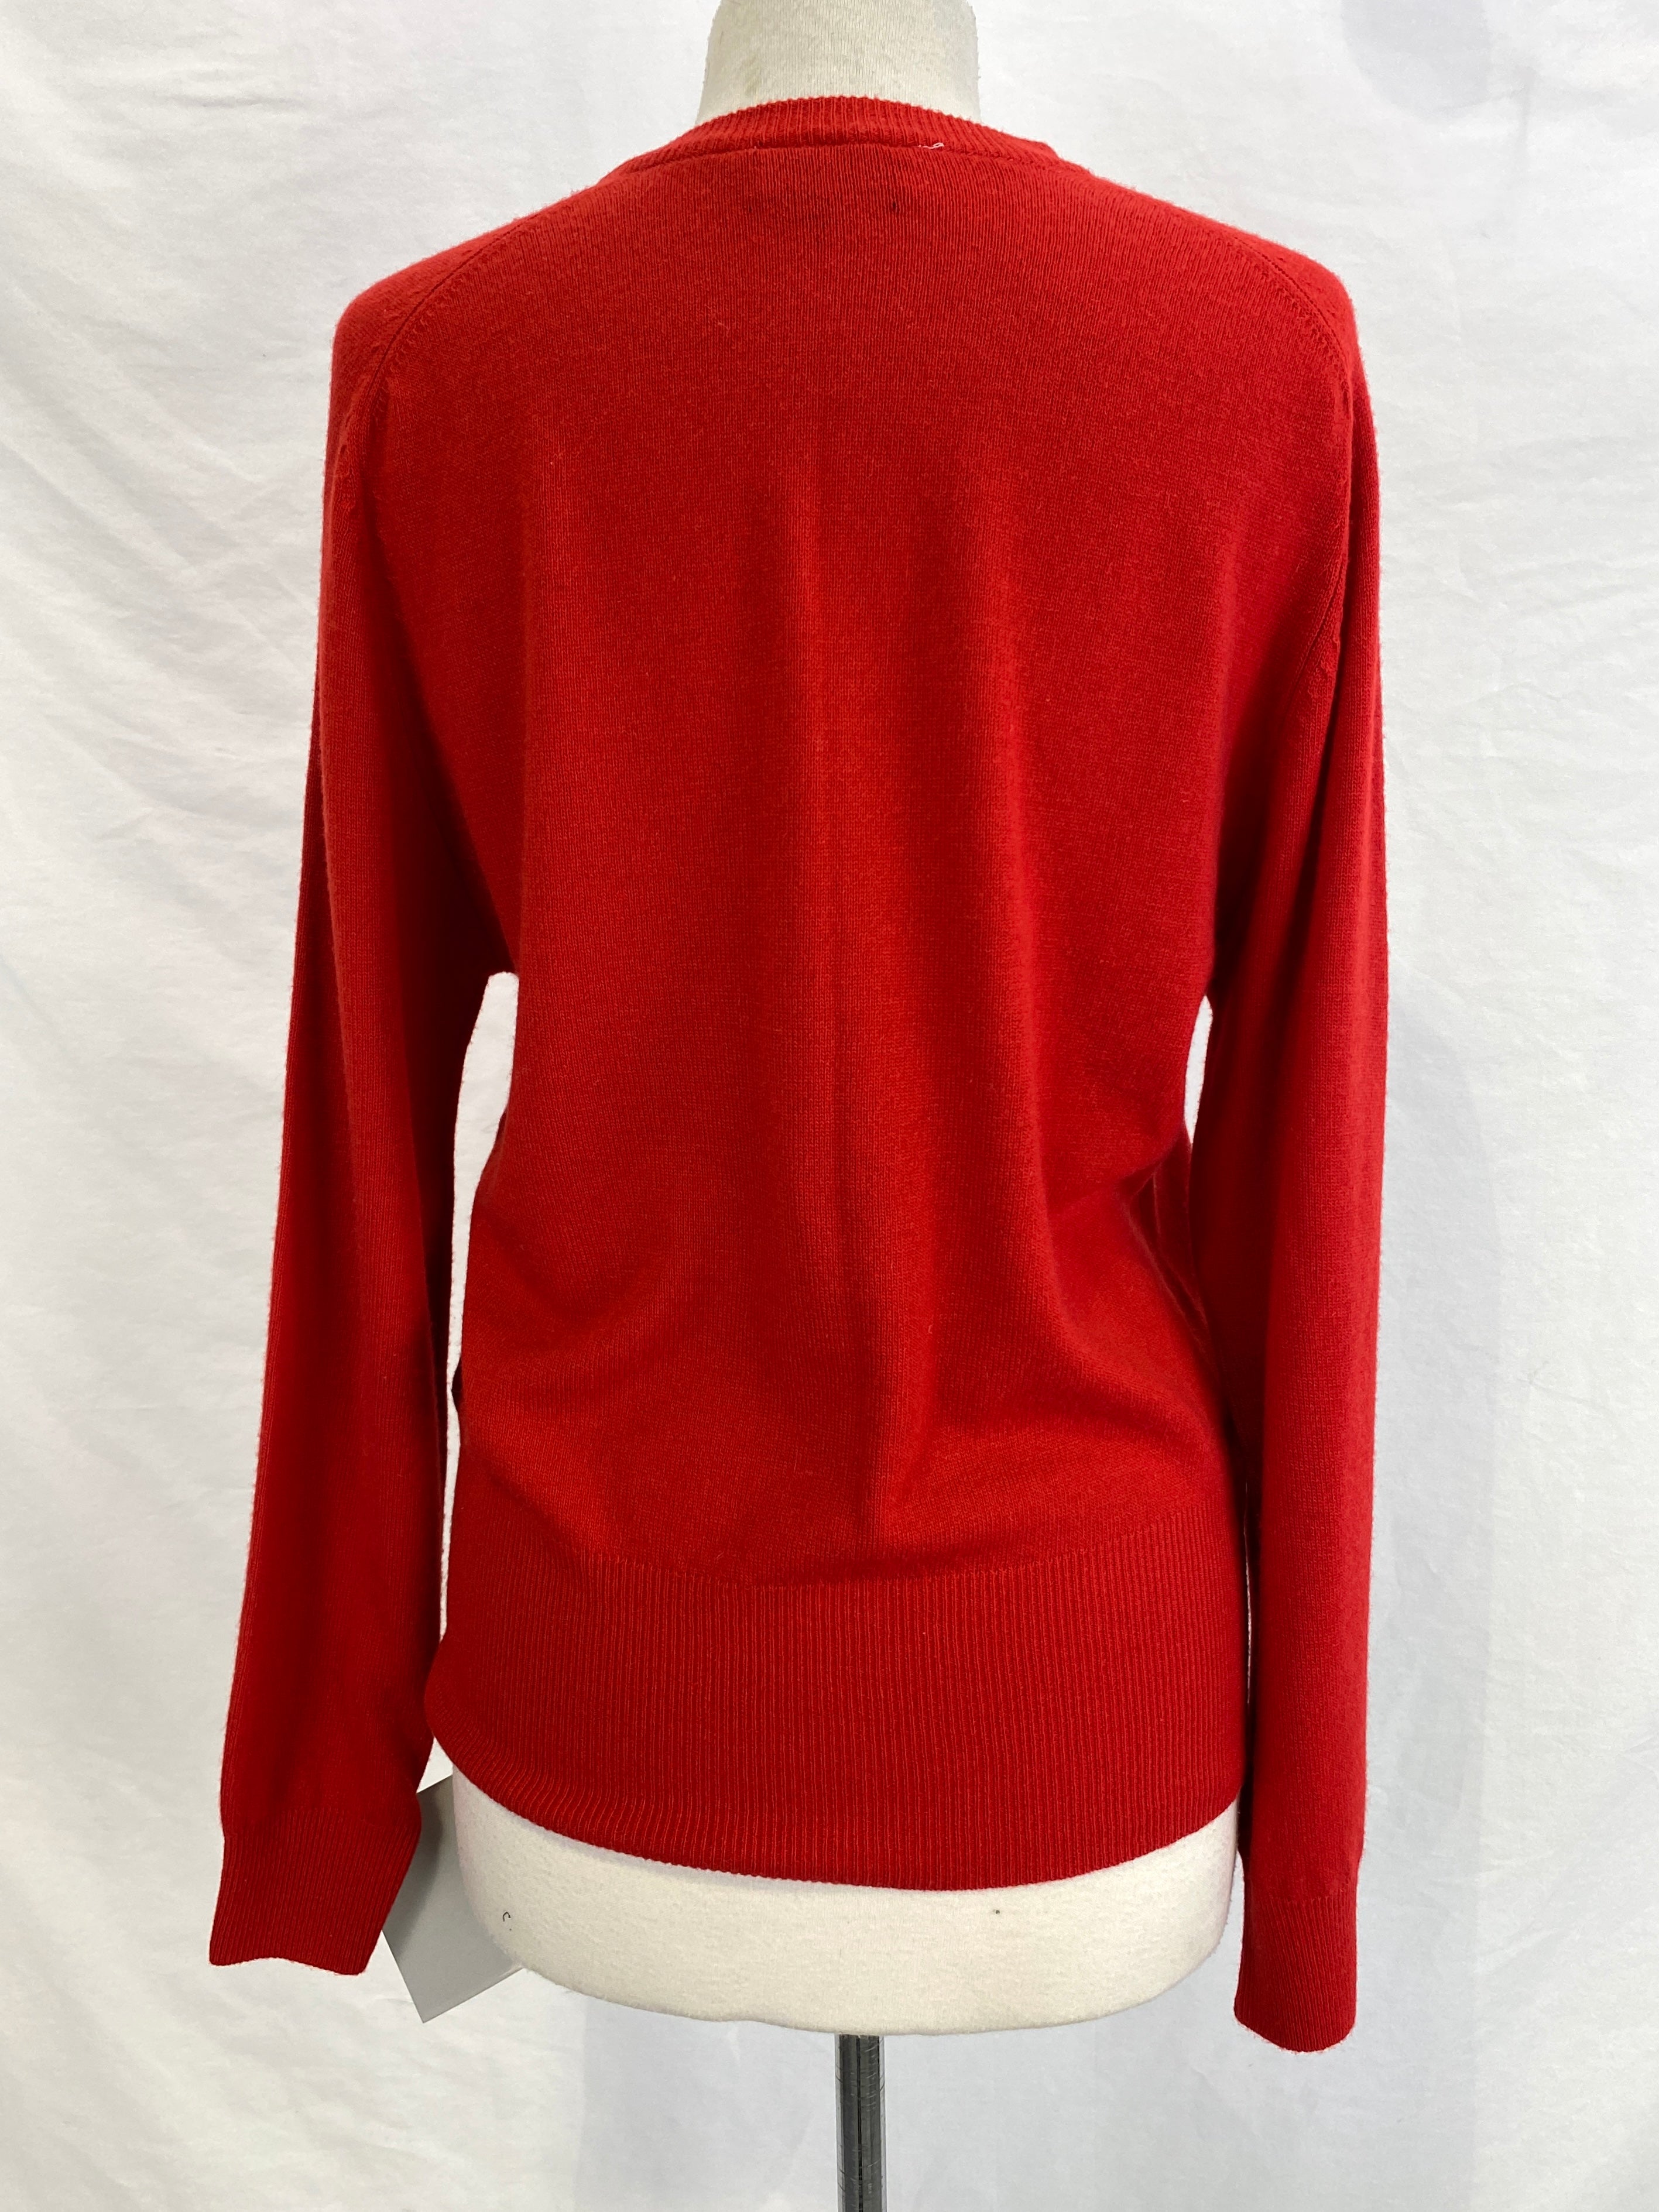 Vintage Cashmere Clothing – Pretty Old